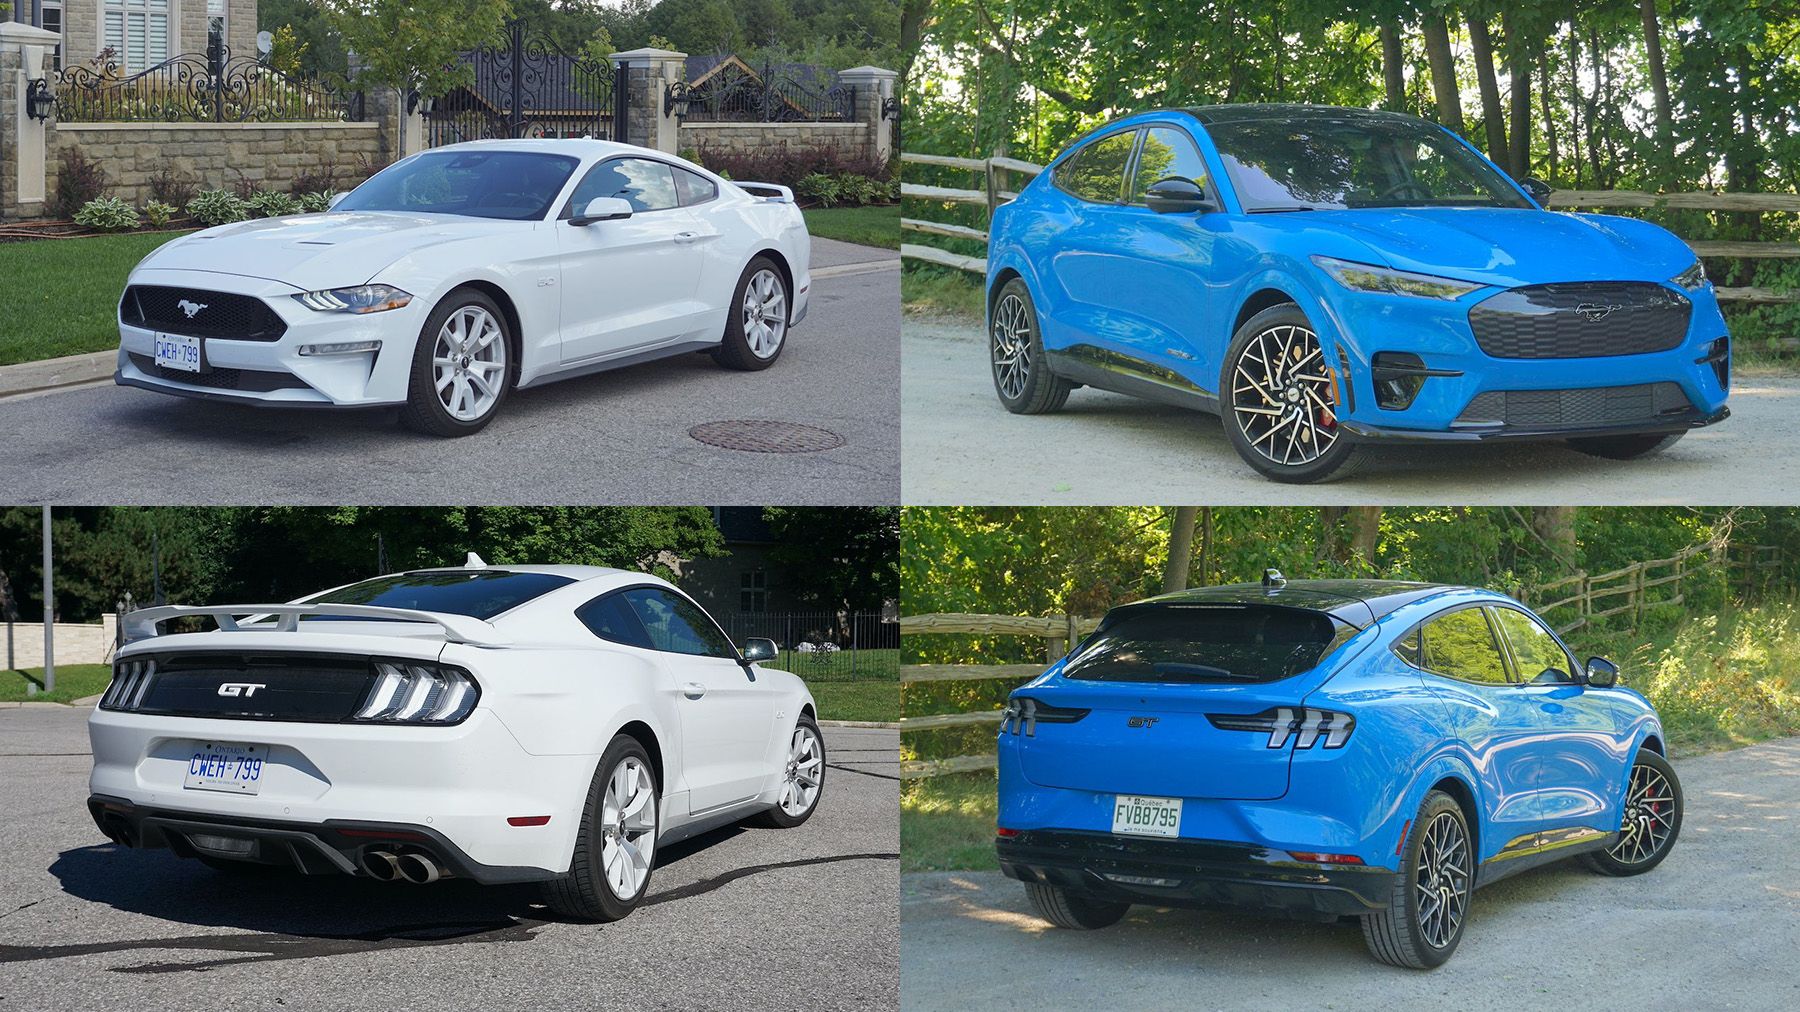 Ford Mustang GT or Mustang Mach-E GT: Which model and trim to buy